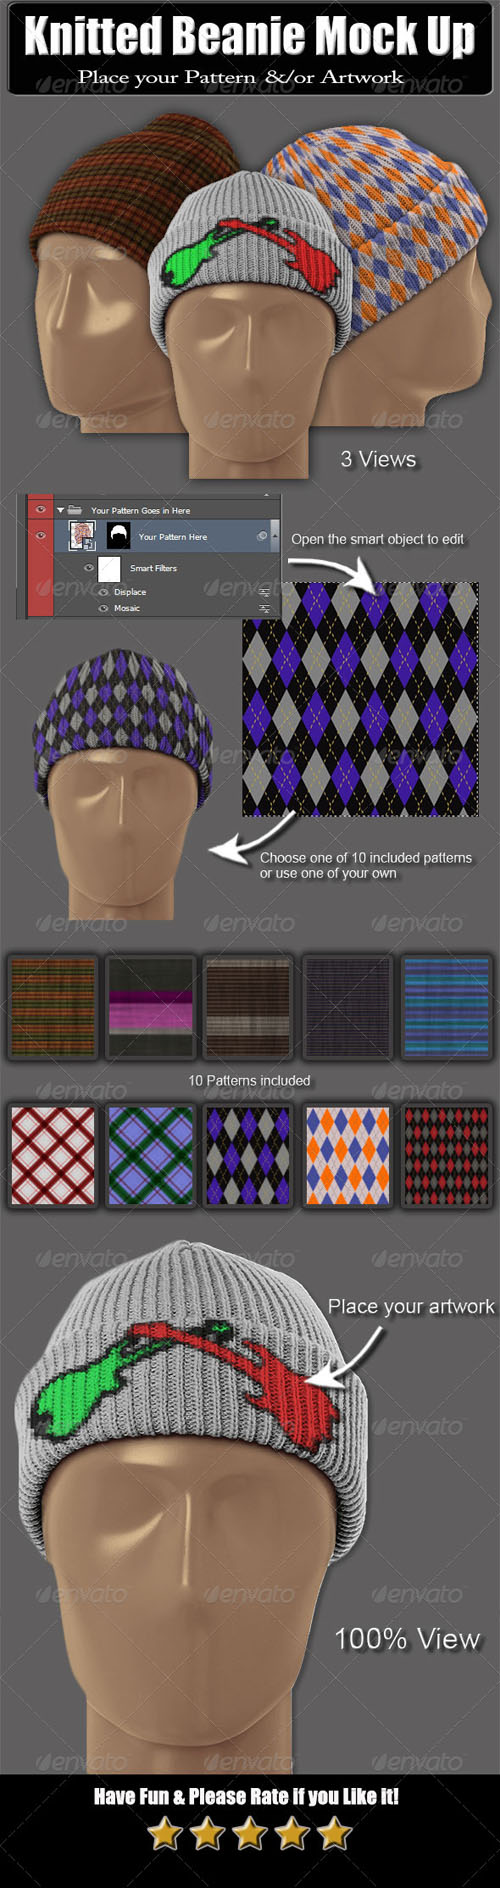 Graphicriver - Knitted Beanie Mock Up - 6088965